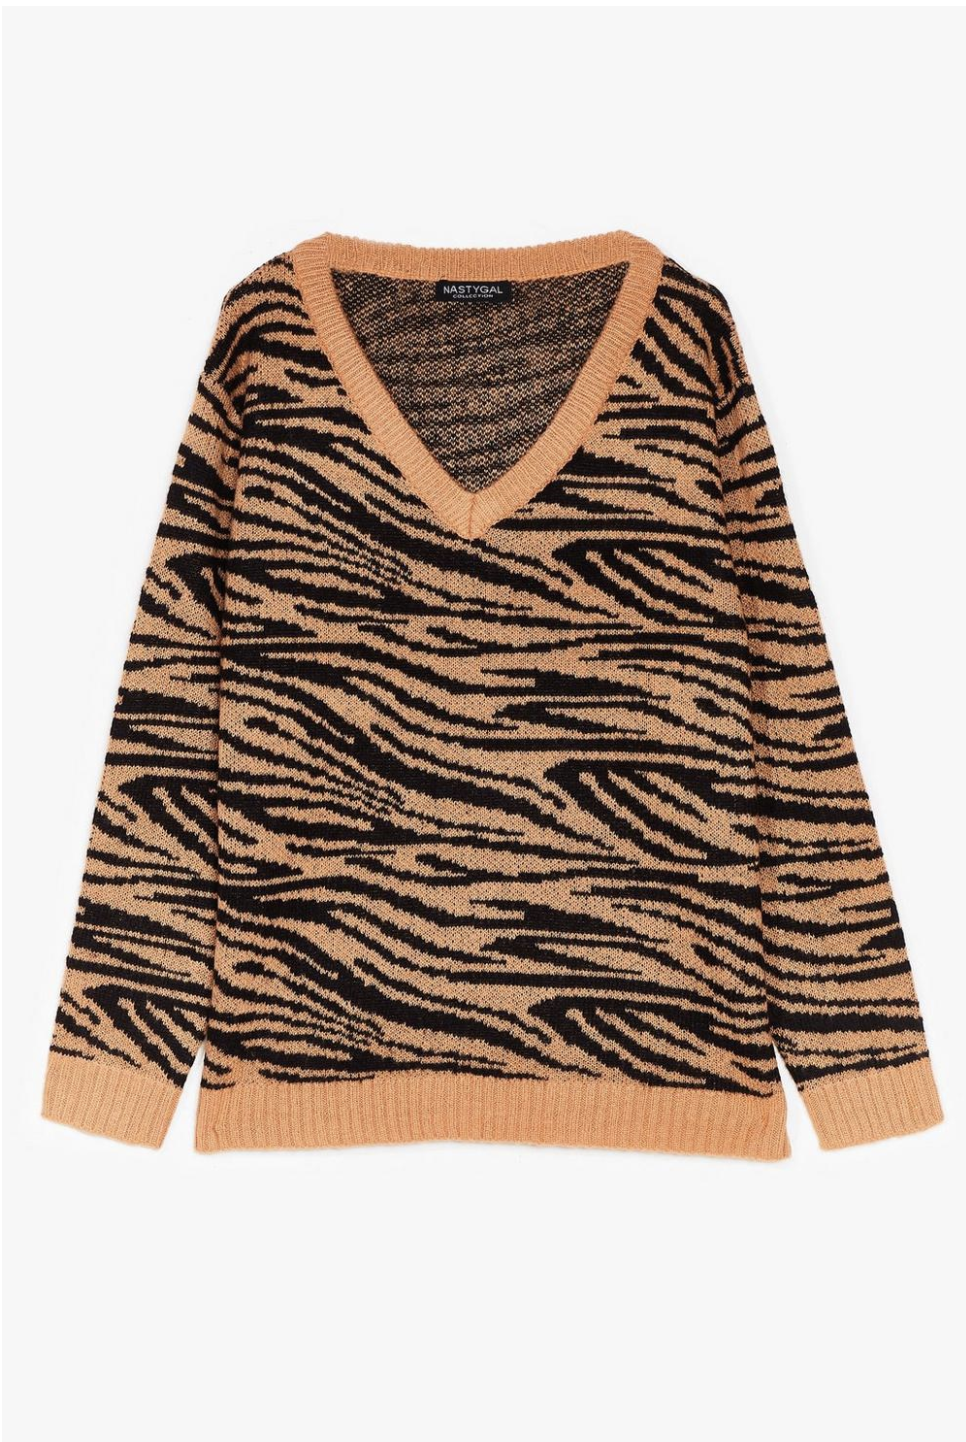 23 Jumpers And Cardigans That Might Actually Get You Excited About The ...